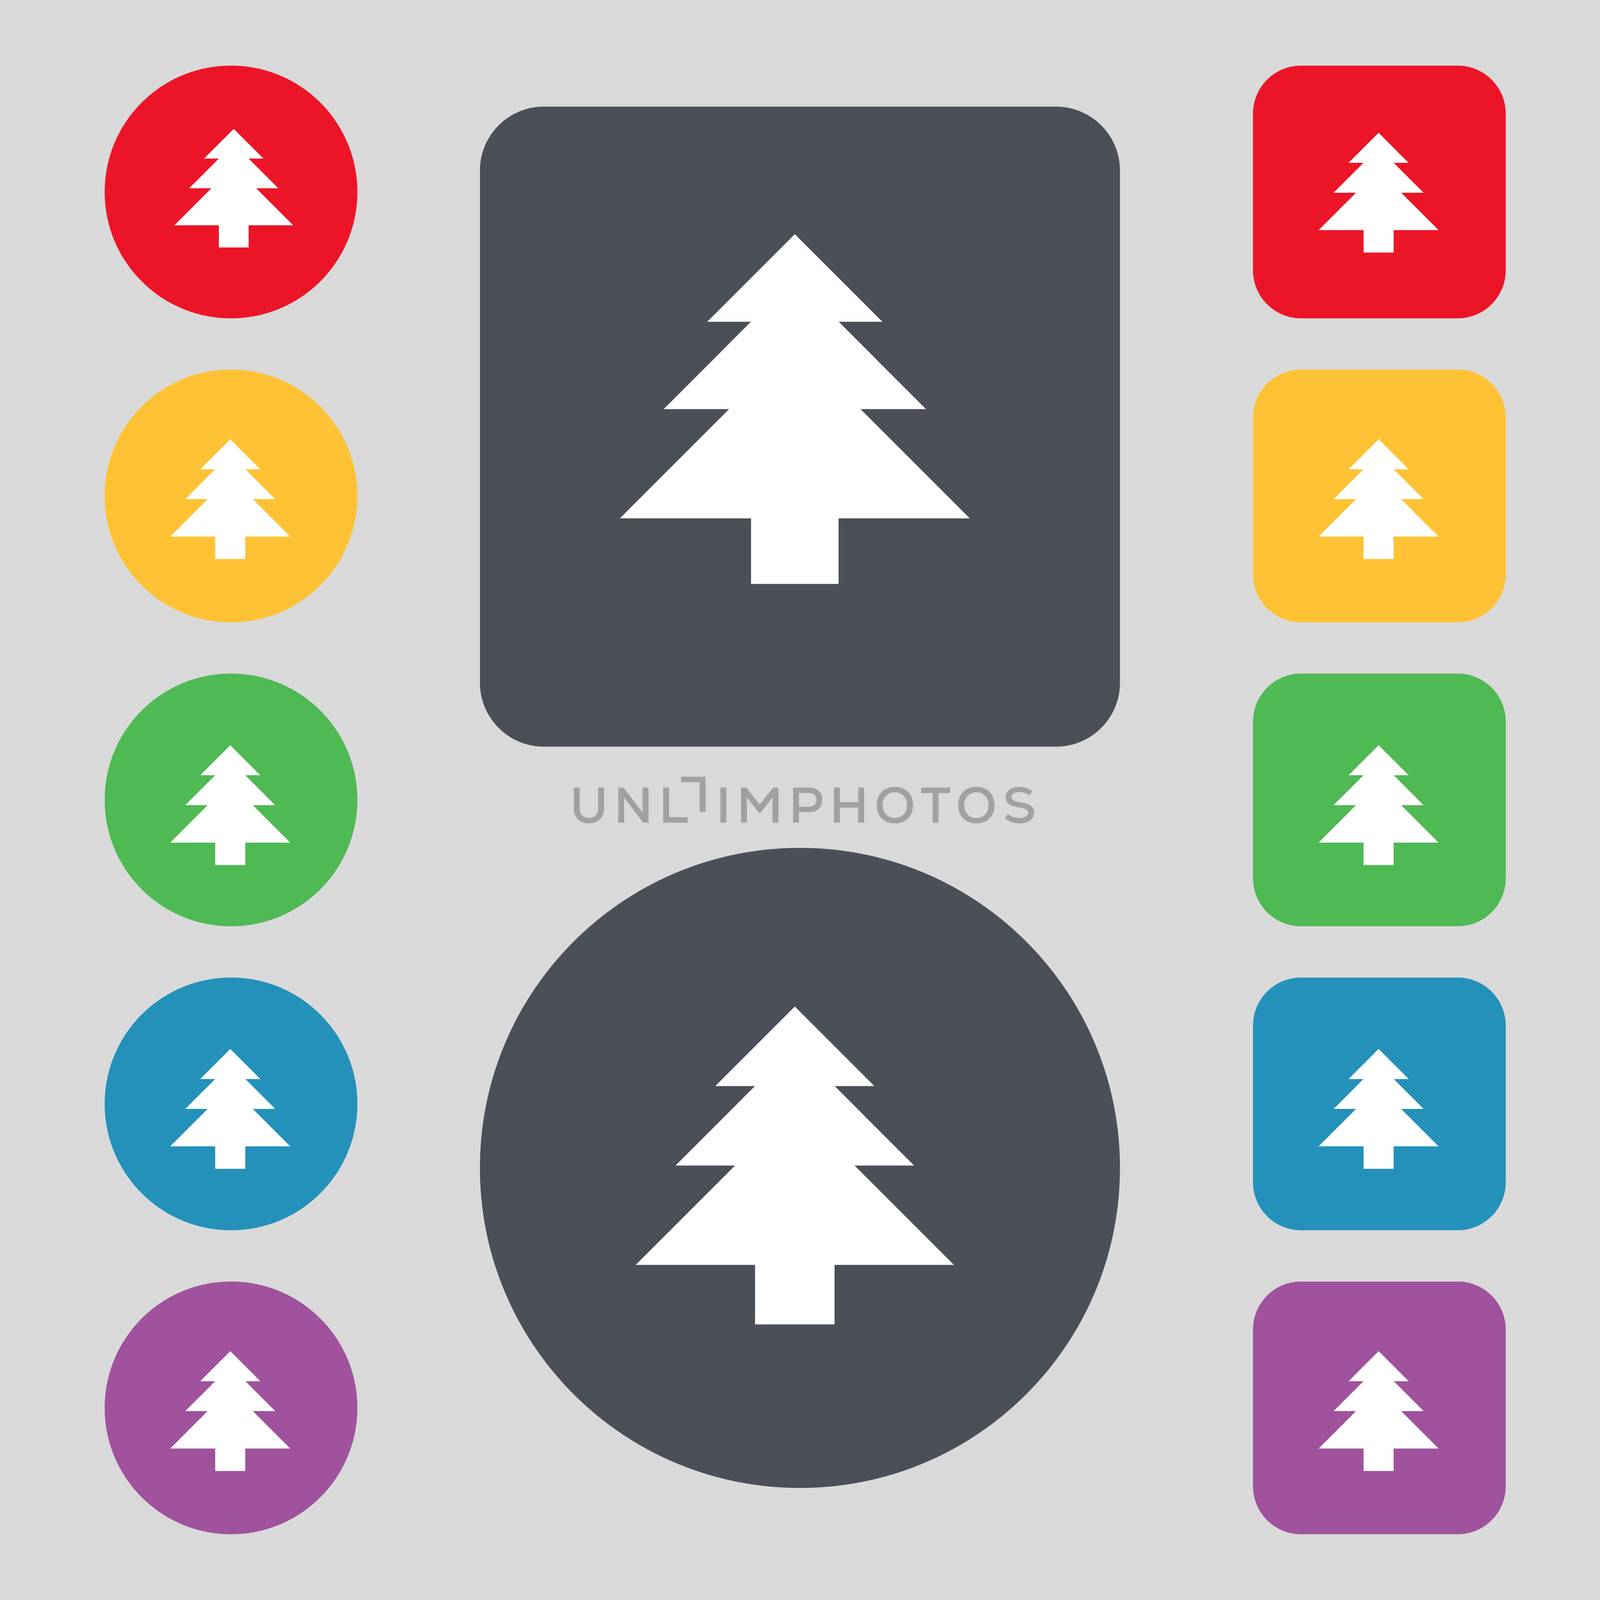 Christmas tree icon sign. A set of 12 colored buttons. Flat design. illustration